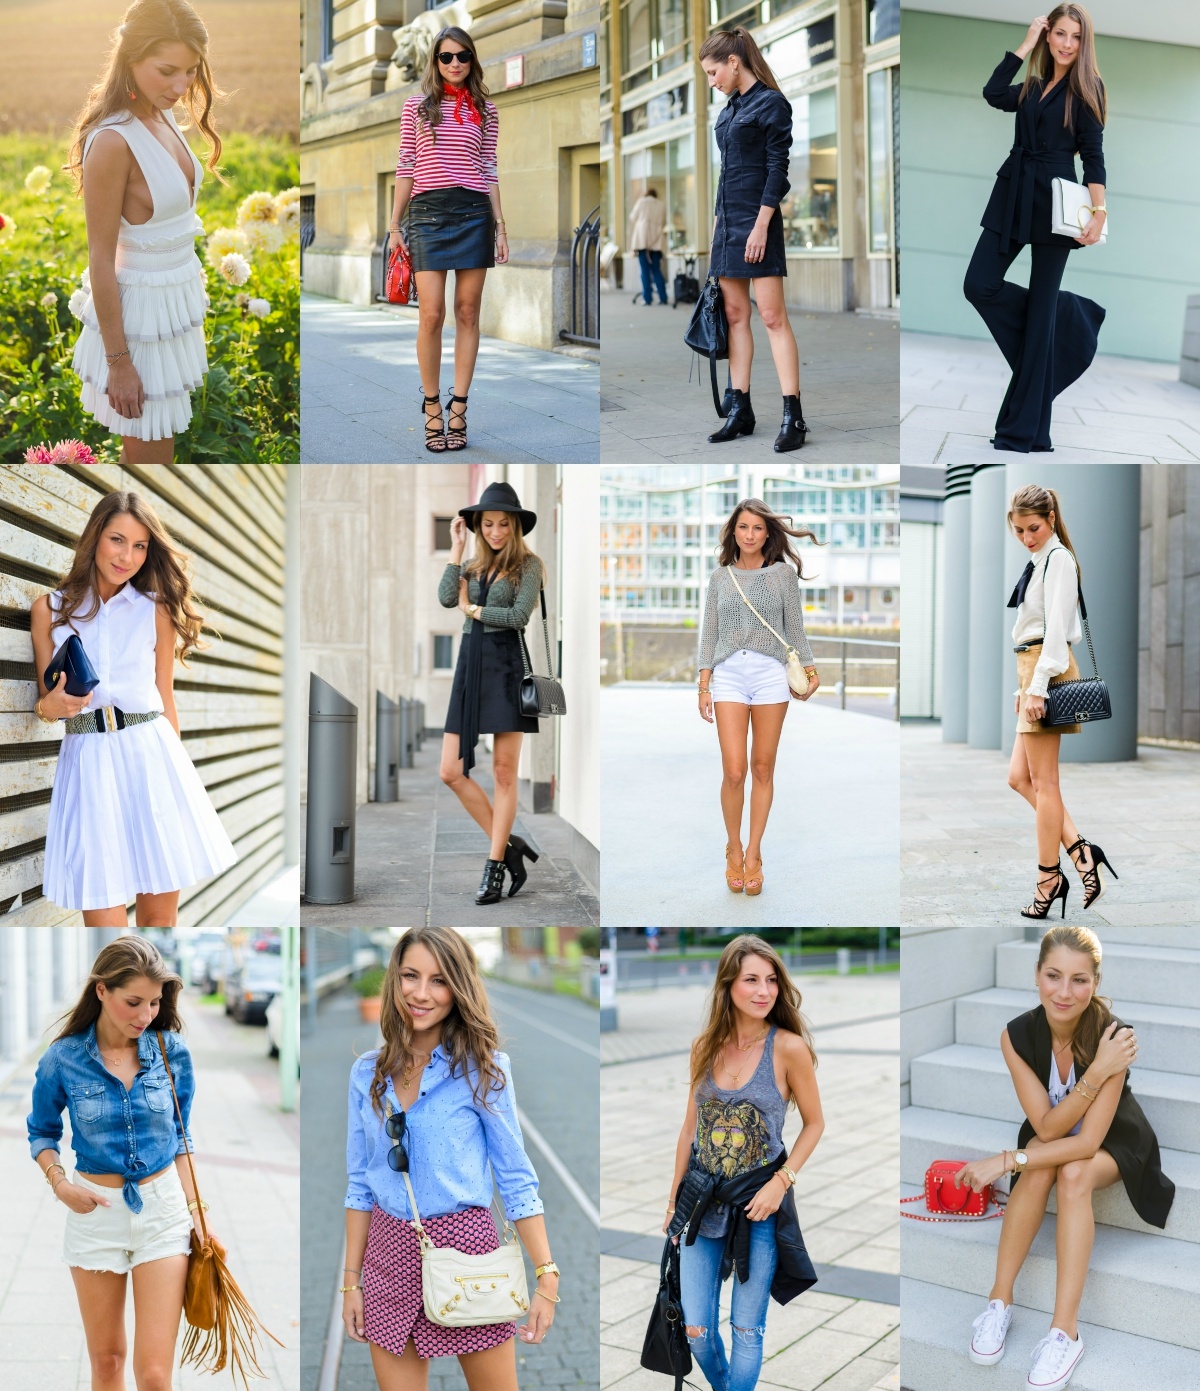 AUGUST OUTFIT REVIEW – WHAT’S YOUR FAVORITE?